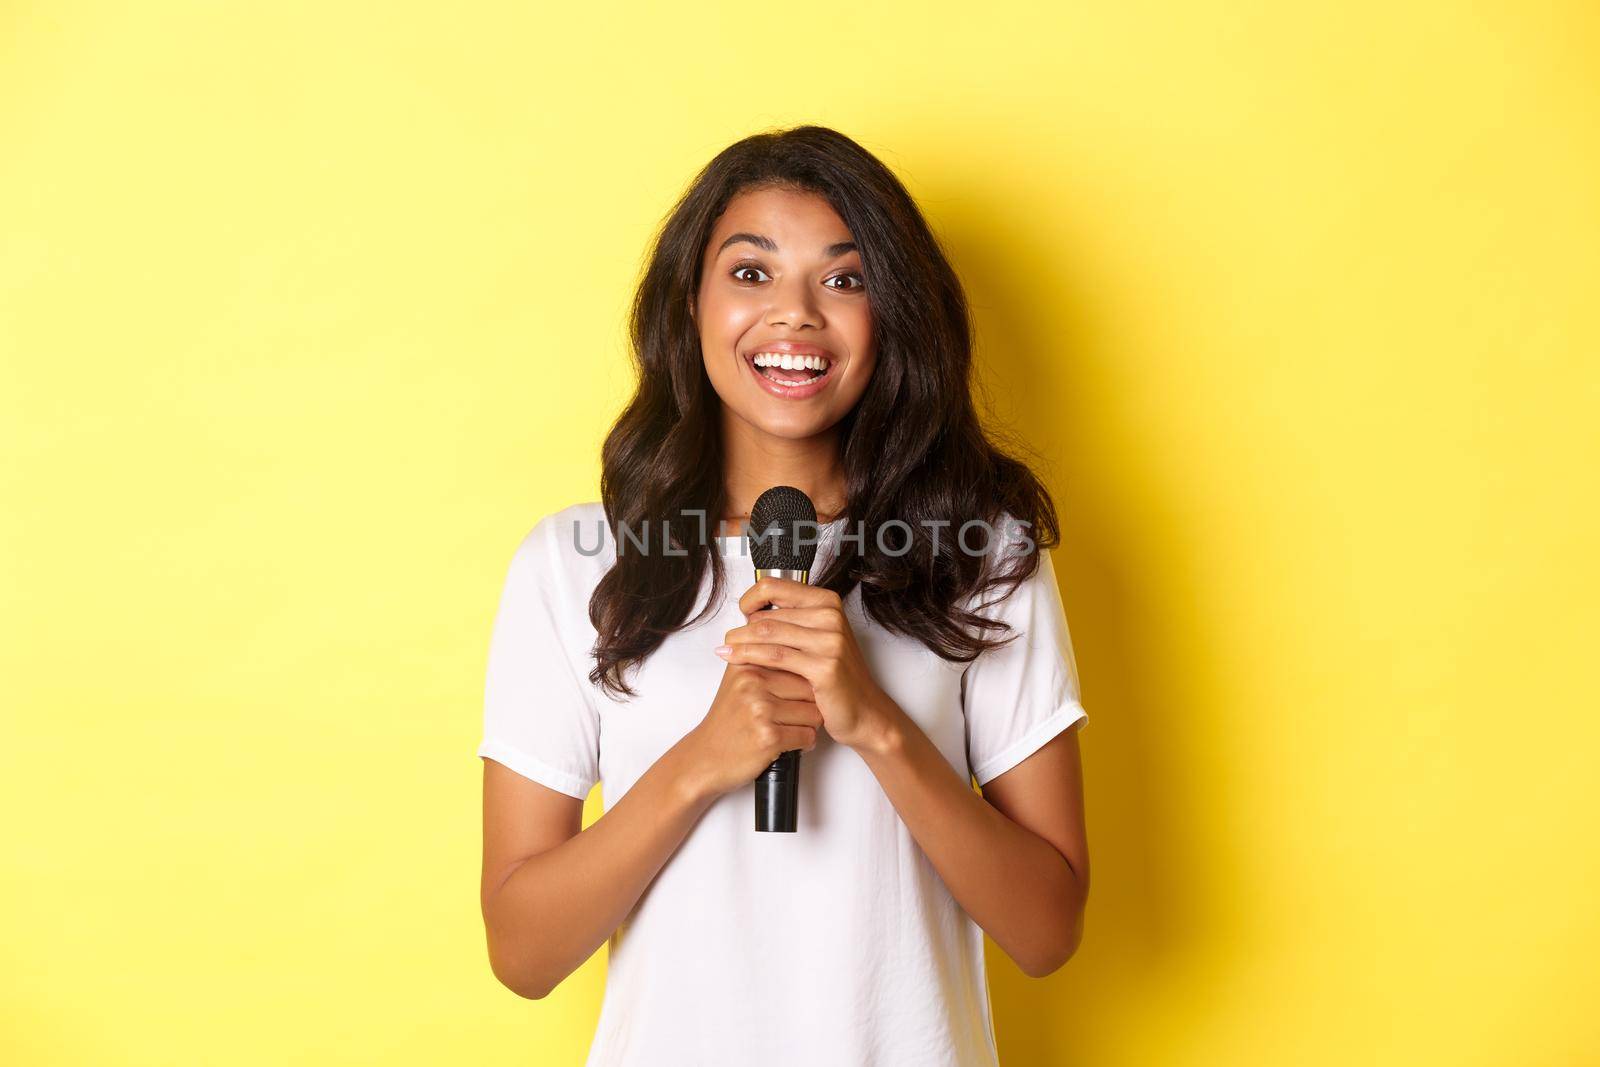 Portrait of happy african-american girl, looking amused while giving speech, holding microphone and smiling at camera, standing over yellow background.